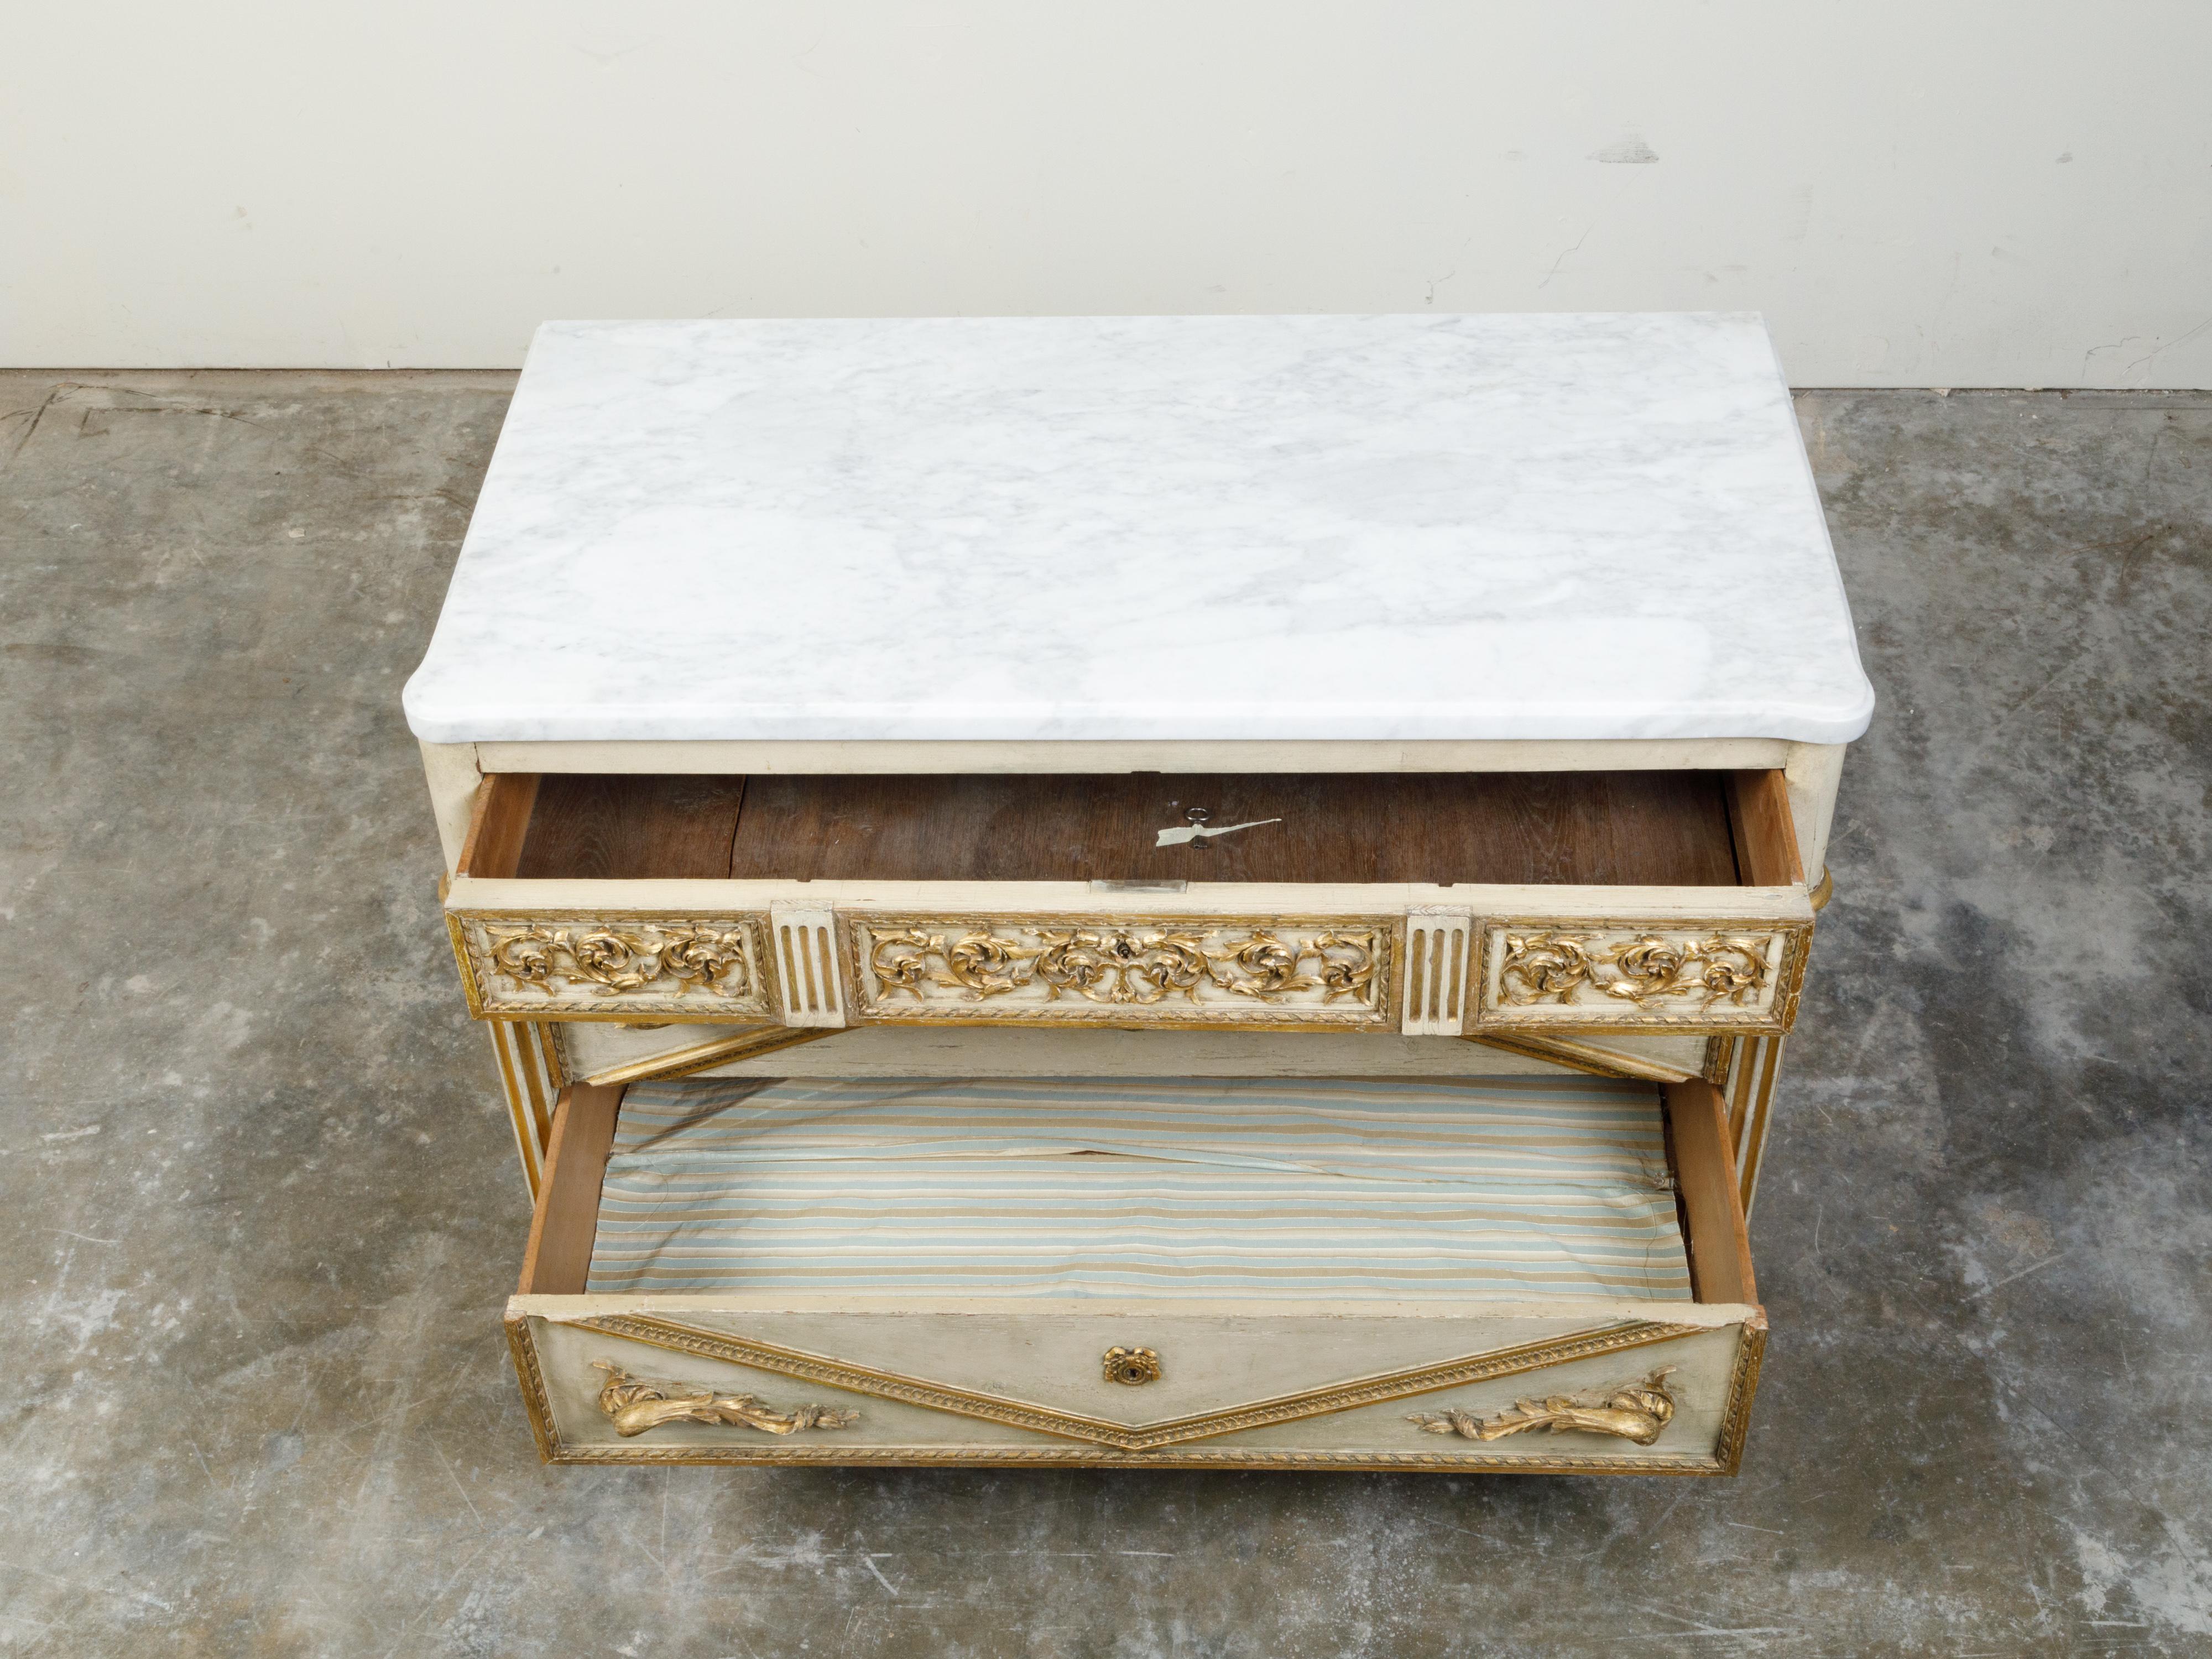 Italian Neoclassical 1800s Three-Drawer Commode with Gilt and Carved Motifs In Good Condition For Sale In Atlanta, GA